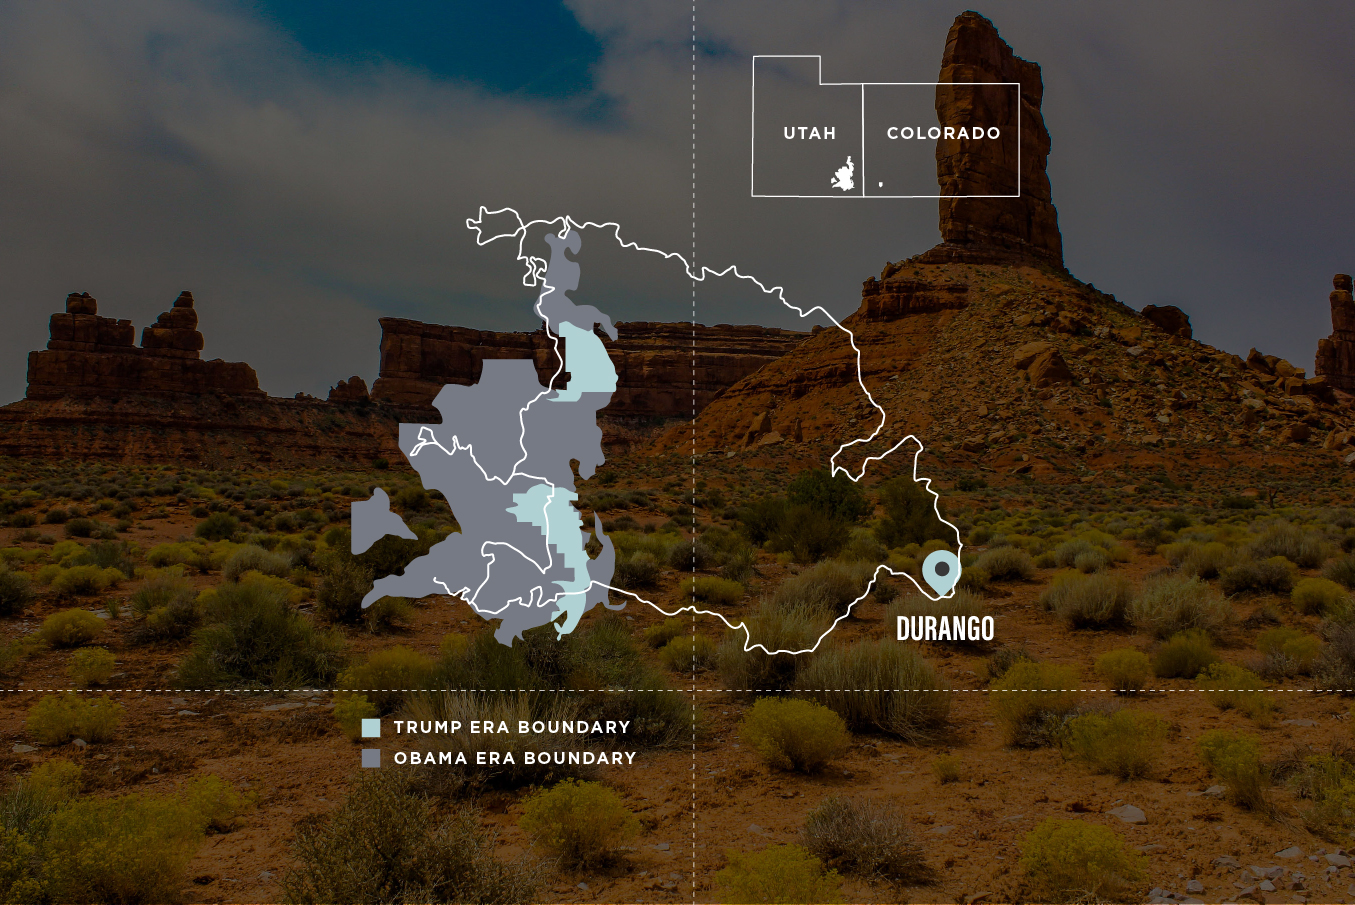 Map showing Ashley's route through Bears Ears National Monument